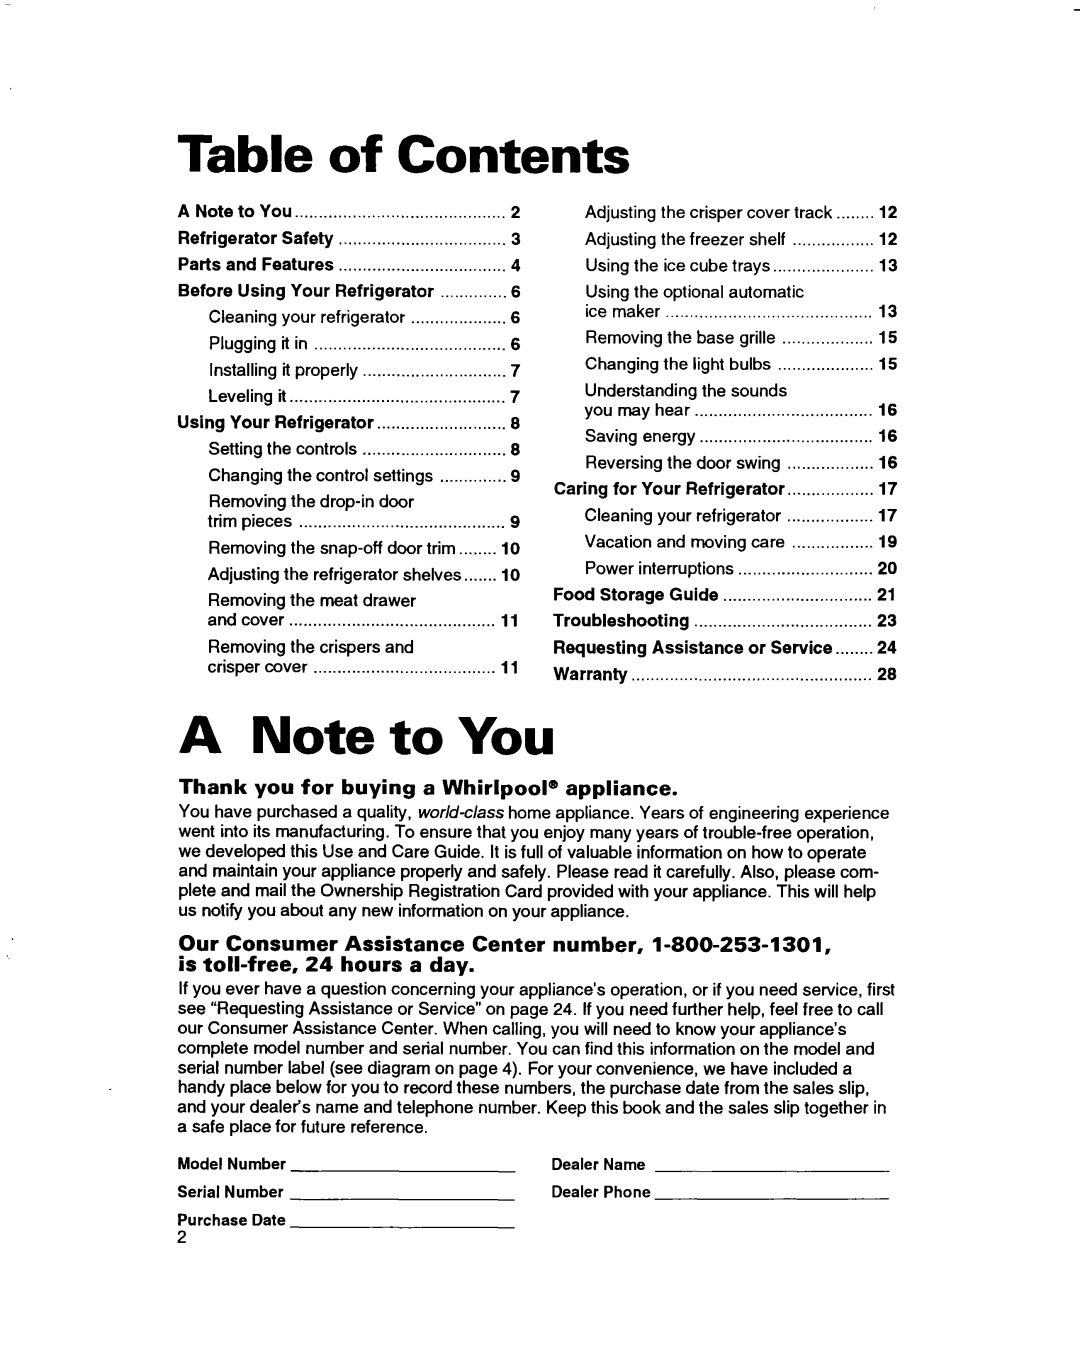 Whirlpool ET14JMXBN00 warranty Table of Contents, A Note to You, Thank you for buying a Whirlpool@ appliance 